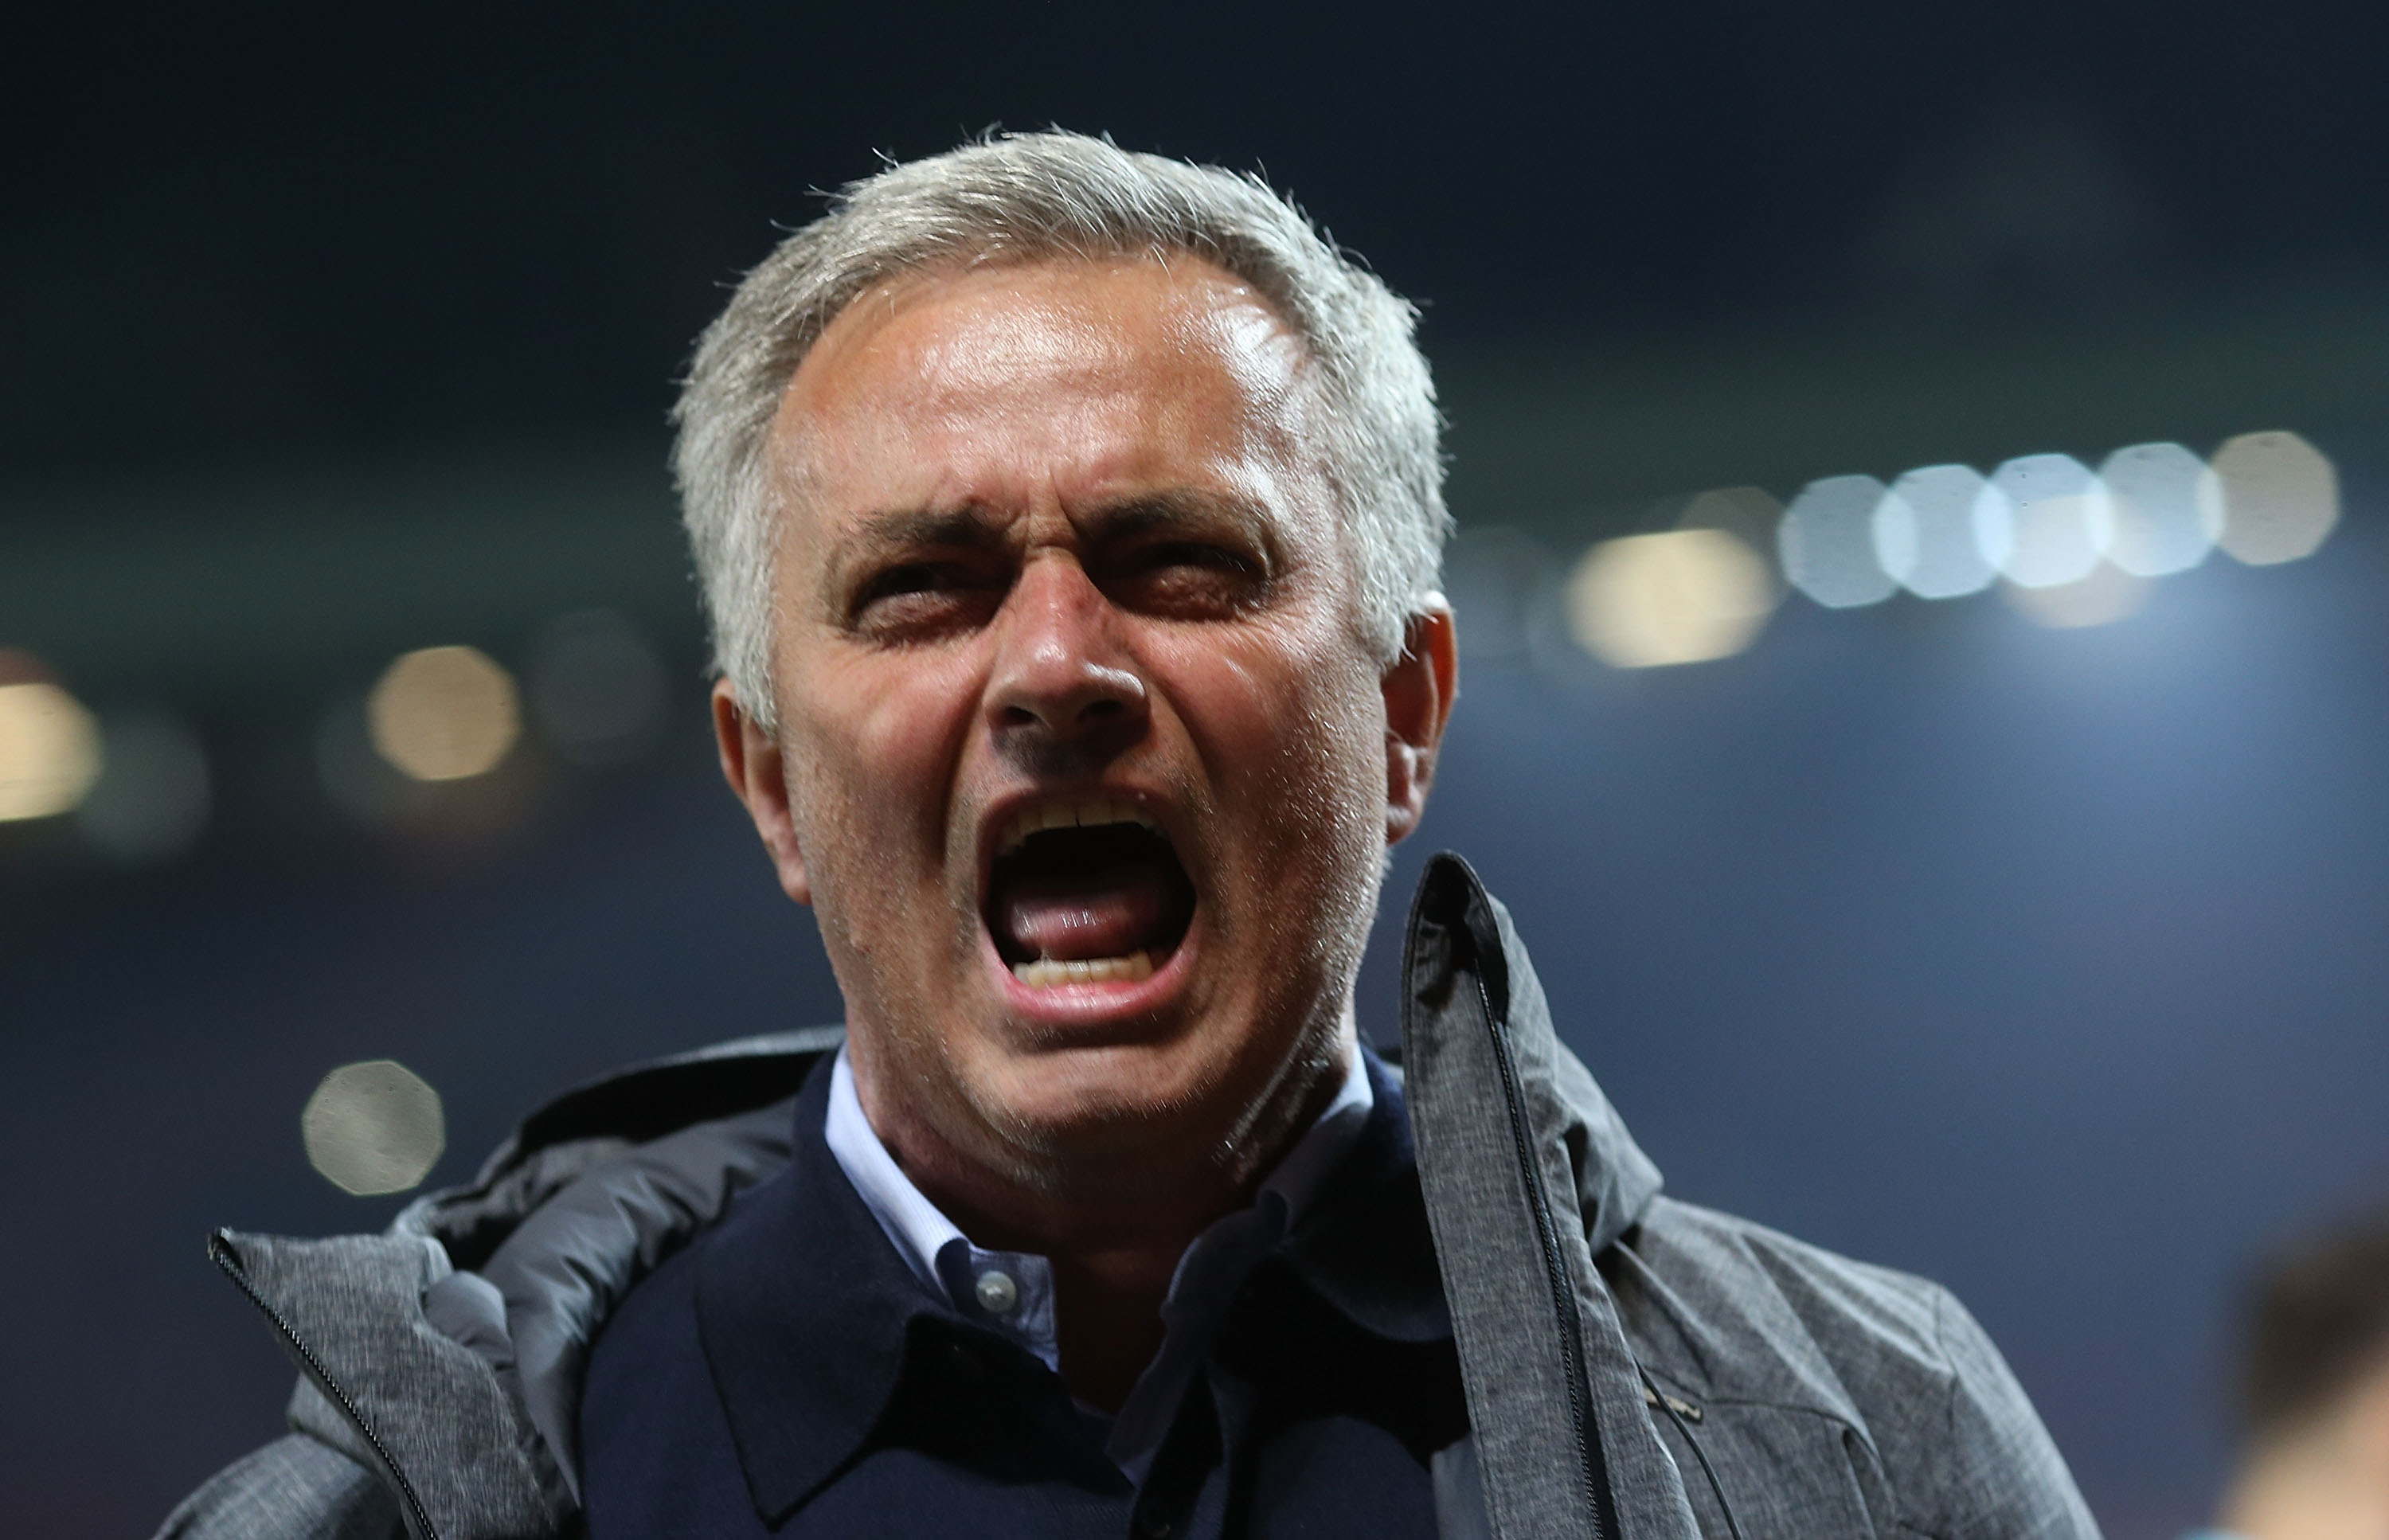 MANCHESTER, ENGLAND - MAY 11:  Manager Jose Mourinho of Manchester United celebrates after the UEFA Europa League, semi final second leg match, between Manchester United and Celta Vigo at Old Trafford on May 11, 2017 in Manchester, United Kingdom.  (Photo by John Peters/Man Utd via Getty Images)